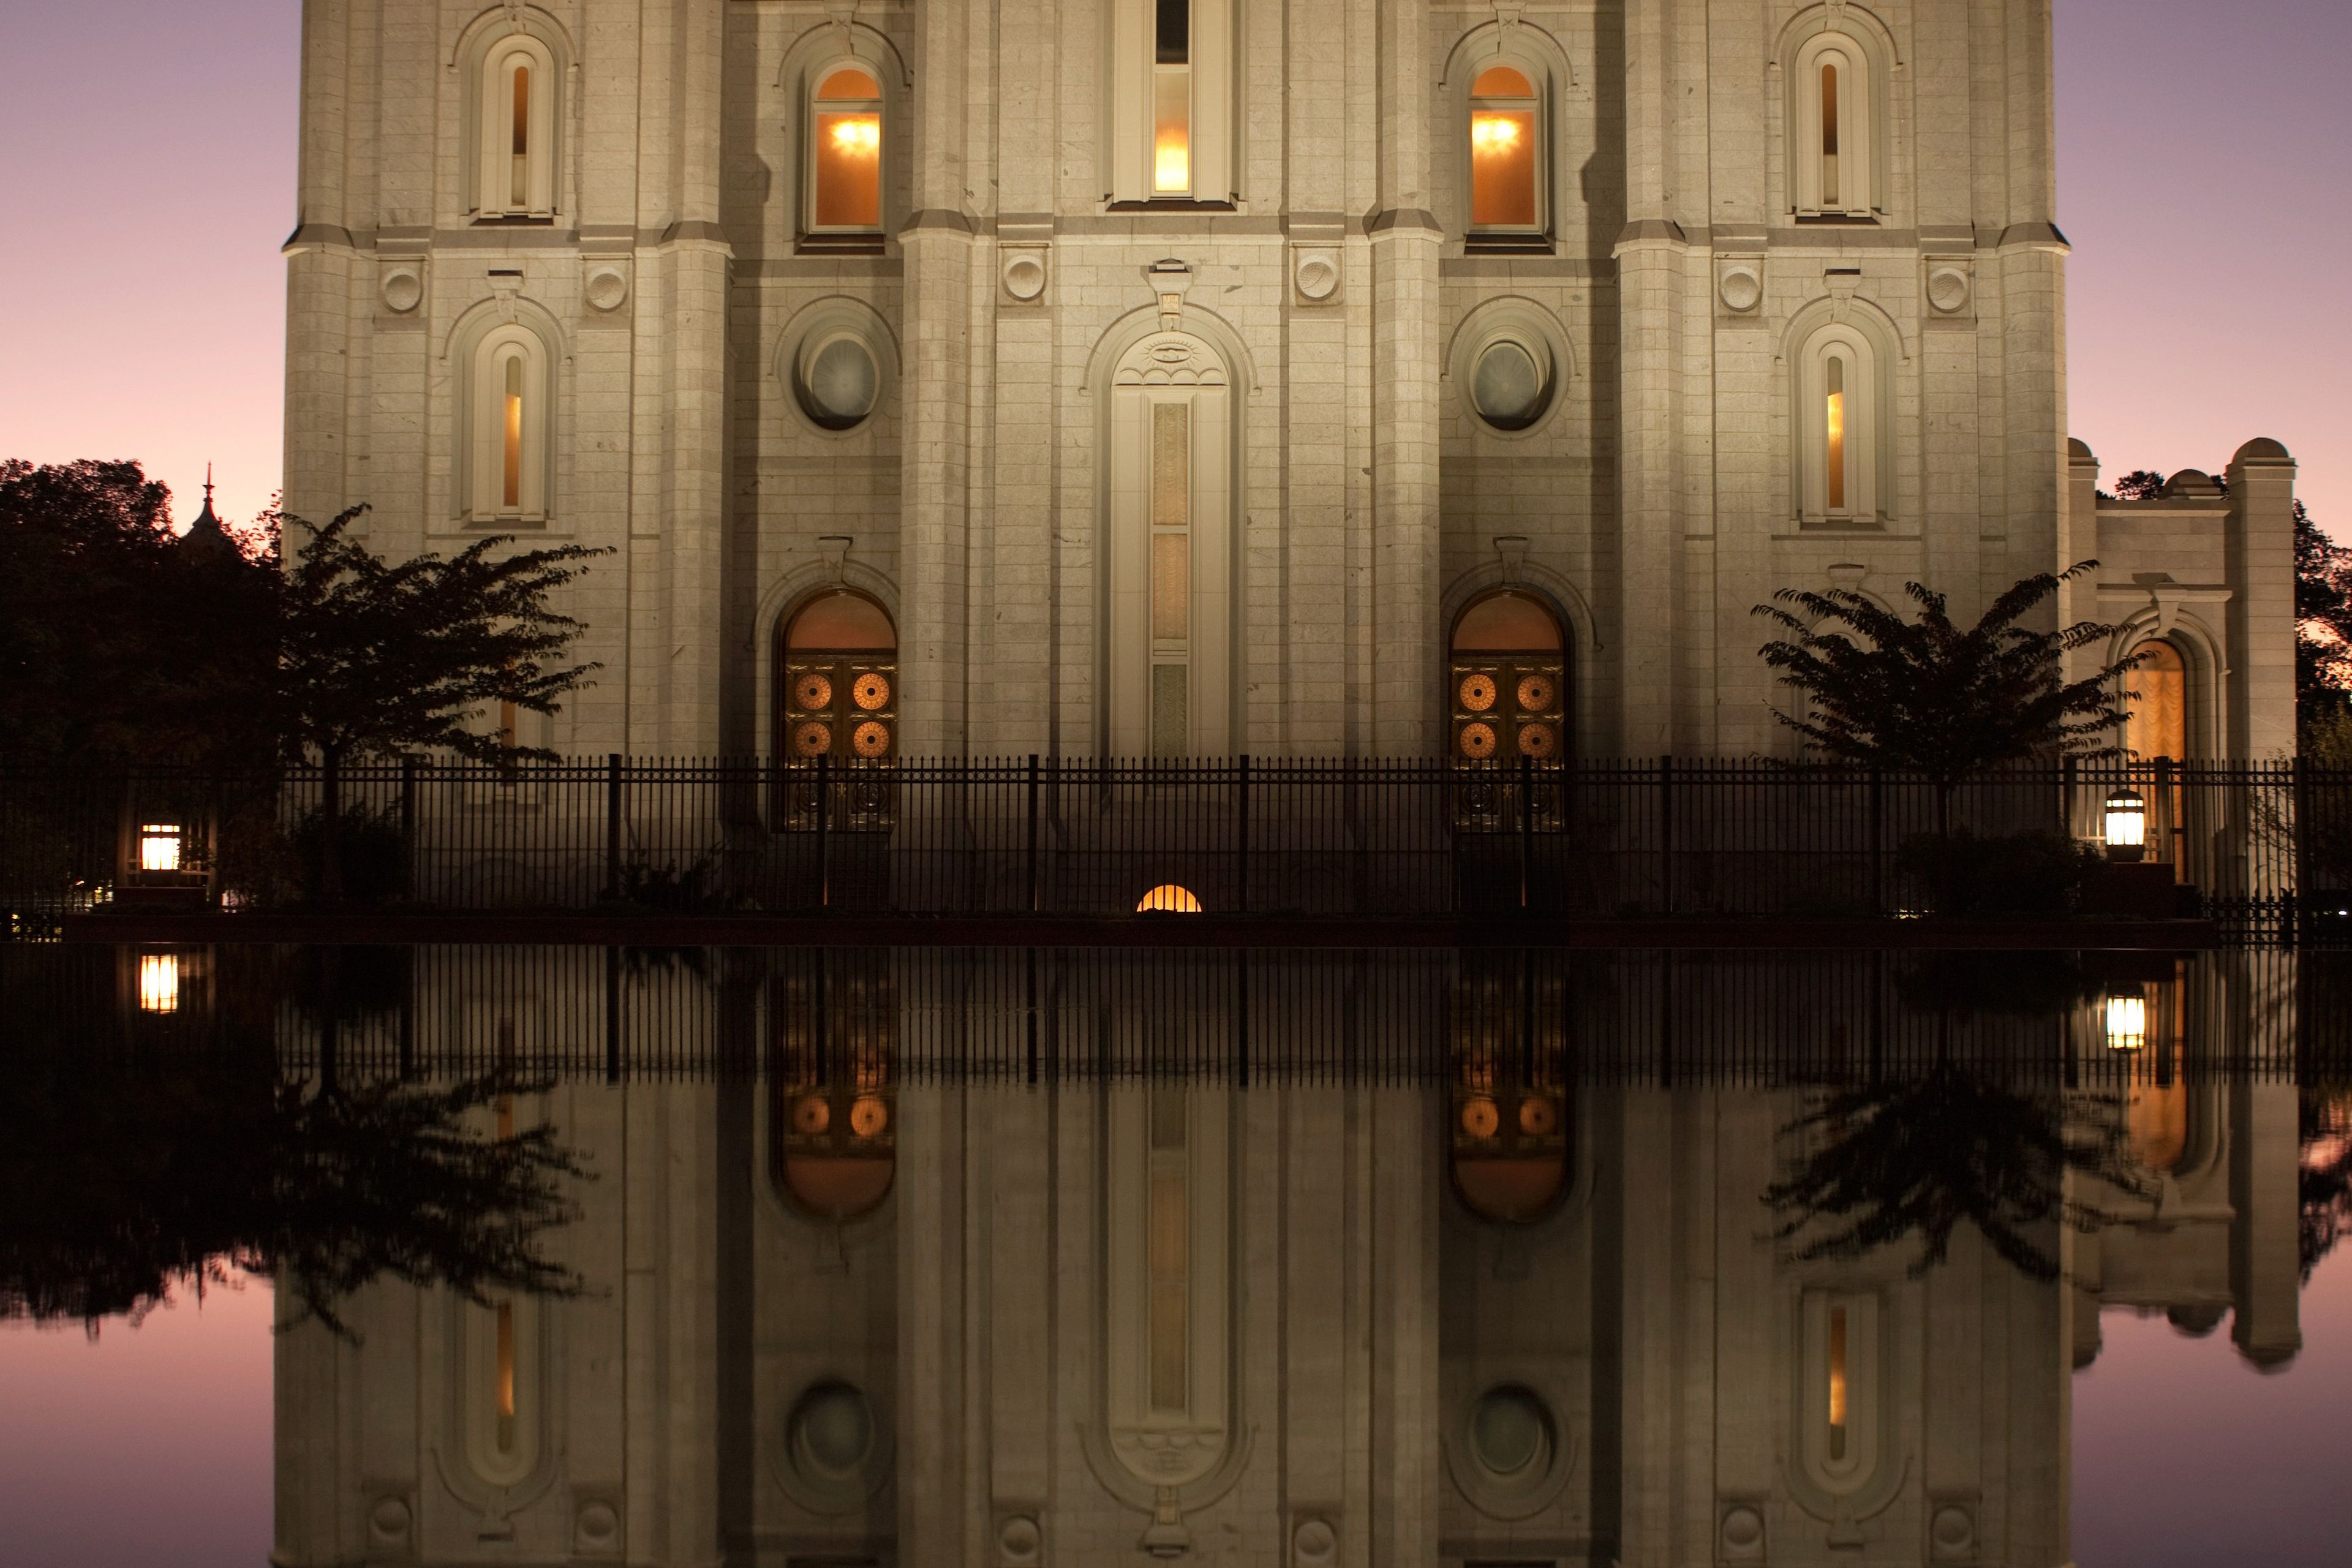 The Salt Lake Temple reflecting pond, including the windows and scenery.